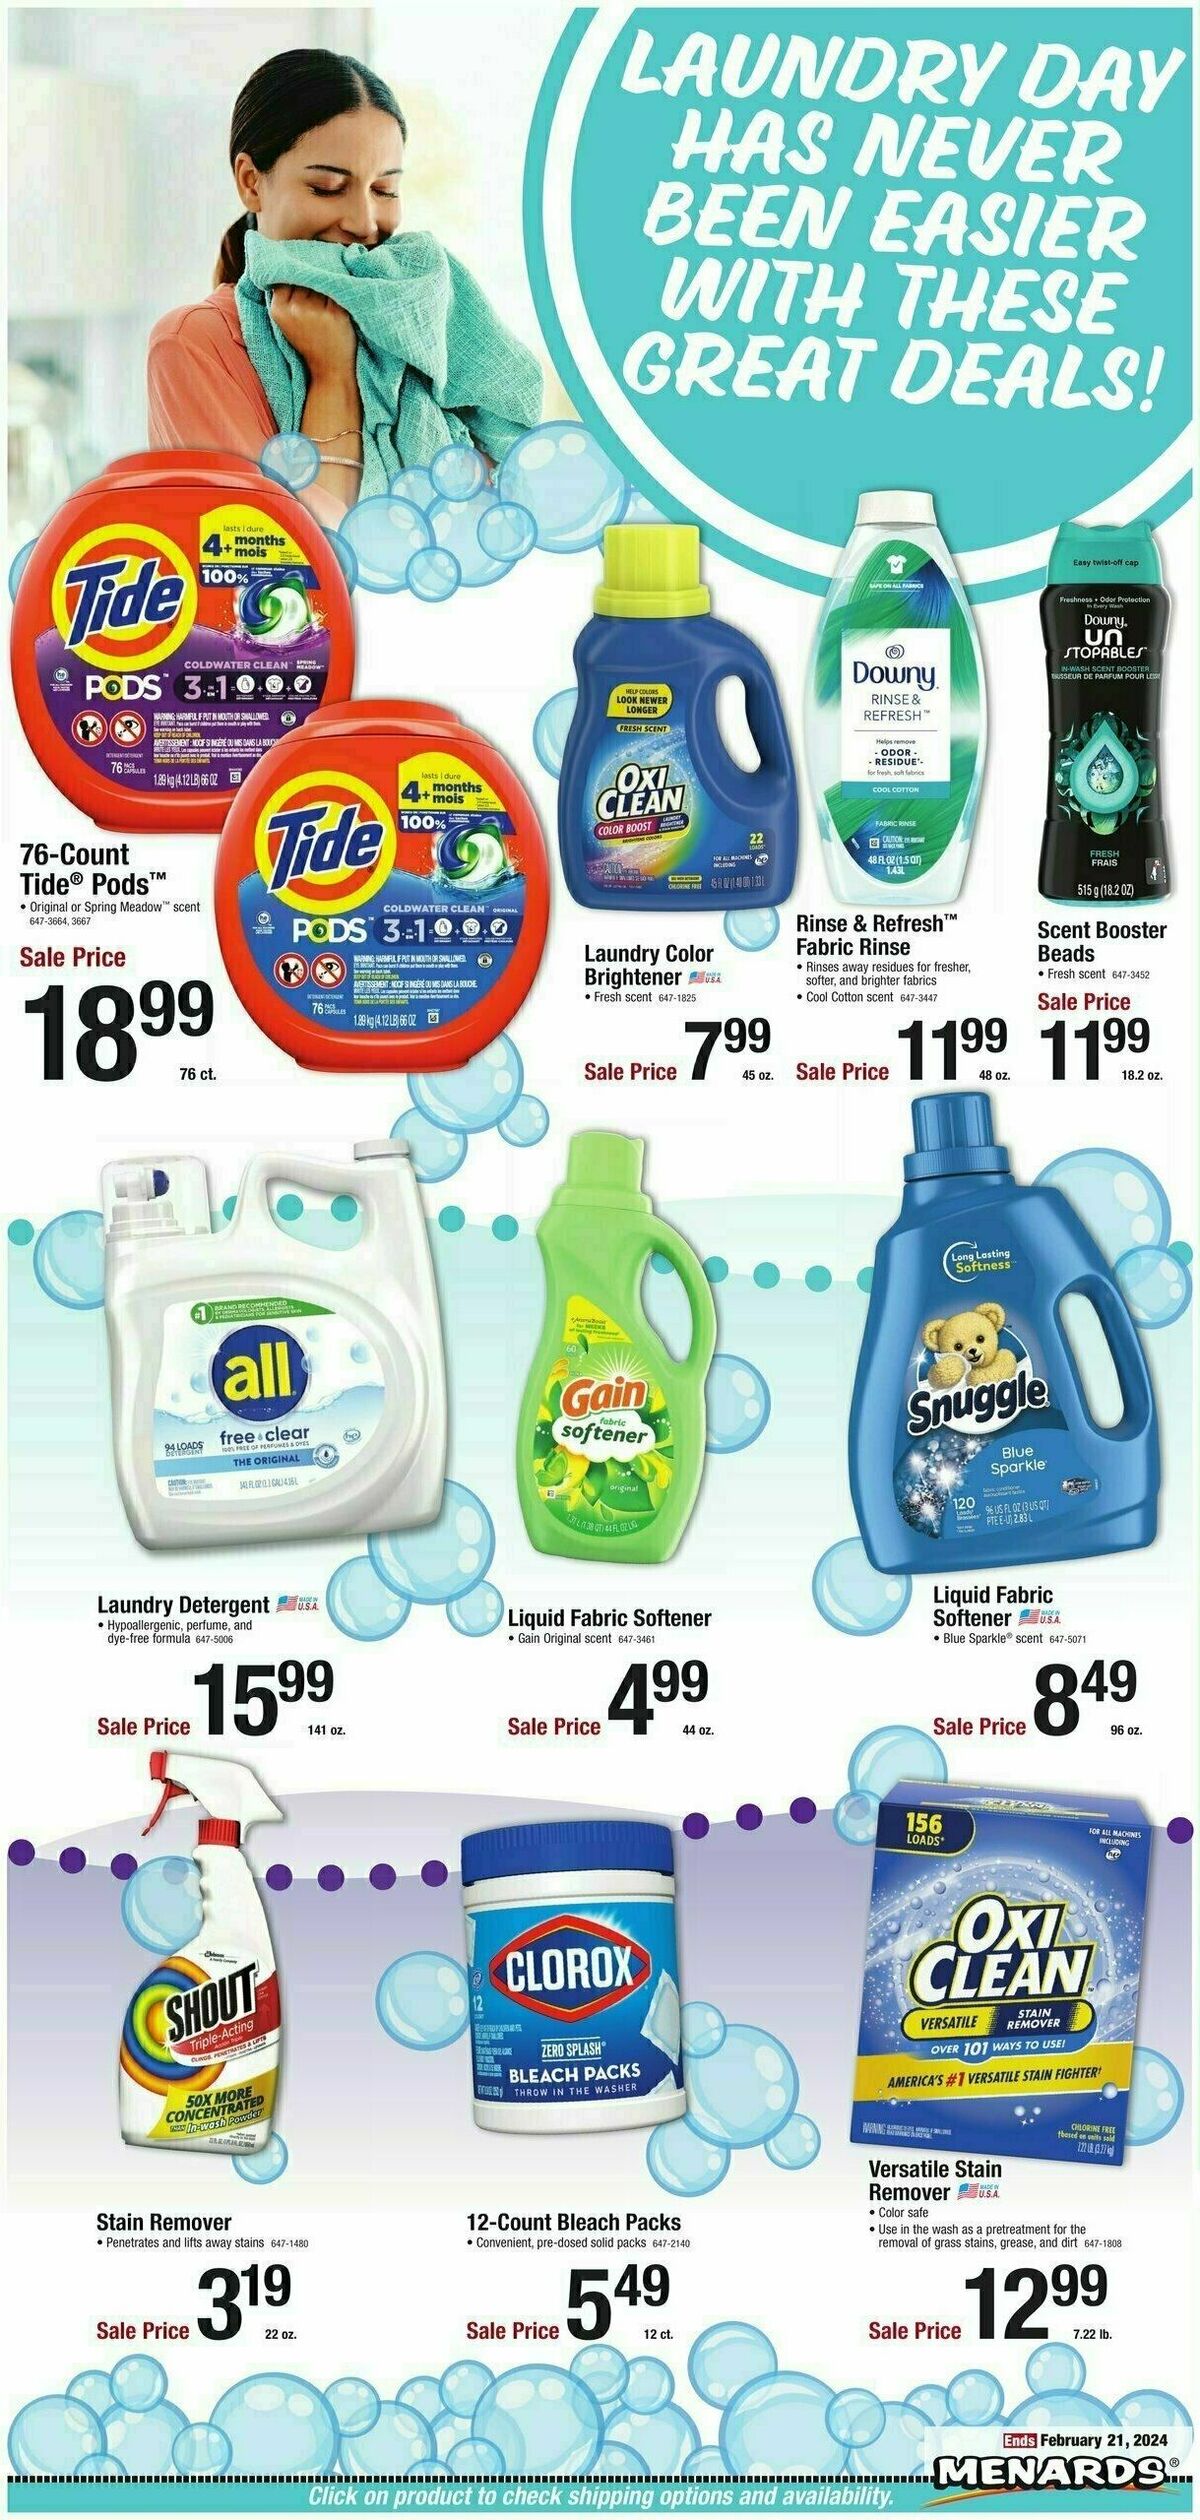 Menards Home Essentials Weekly Ad from February 14